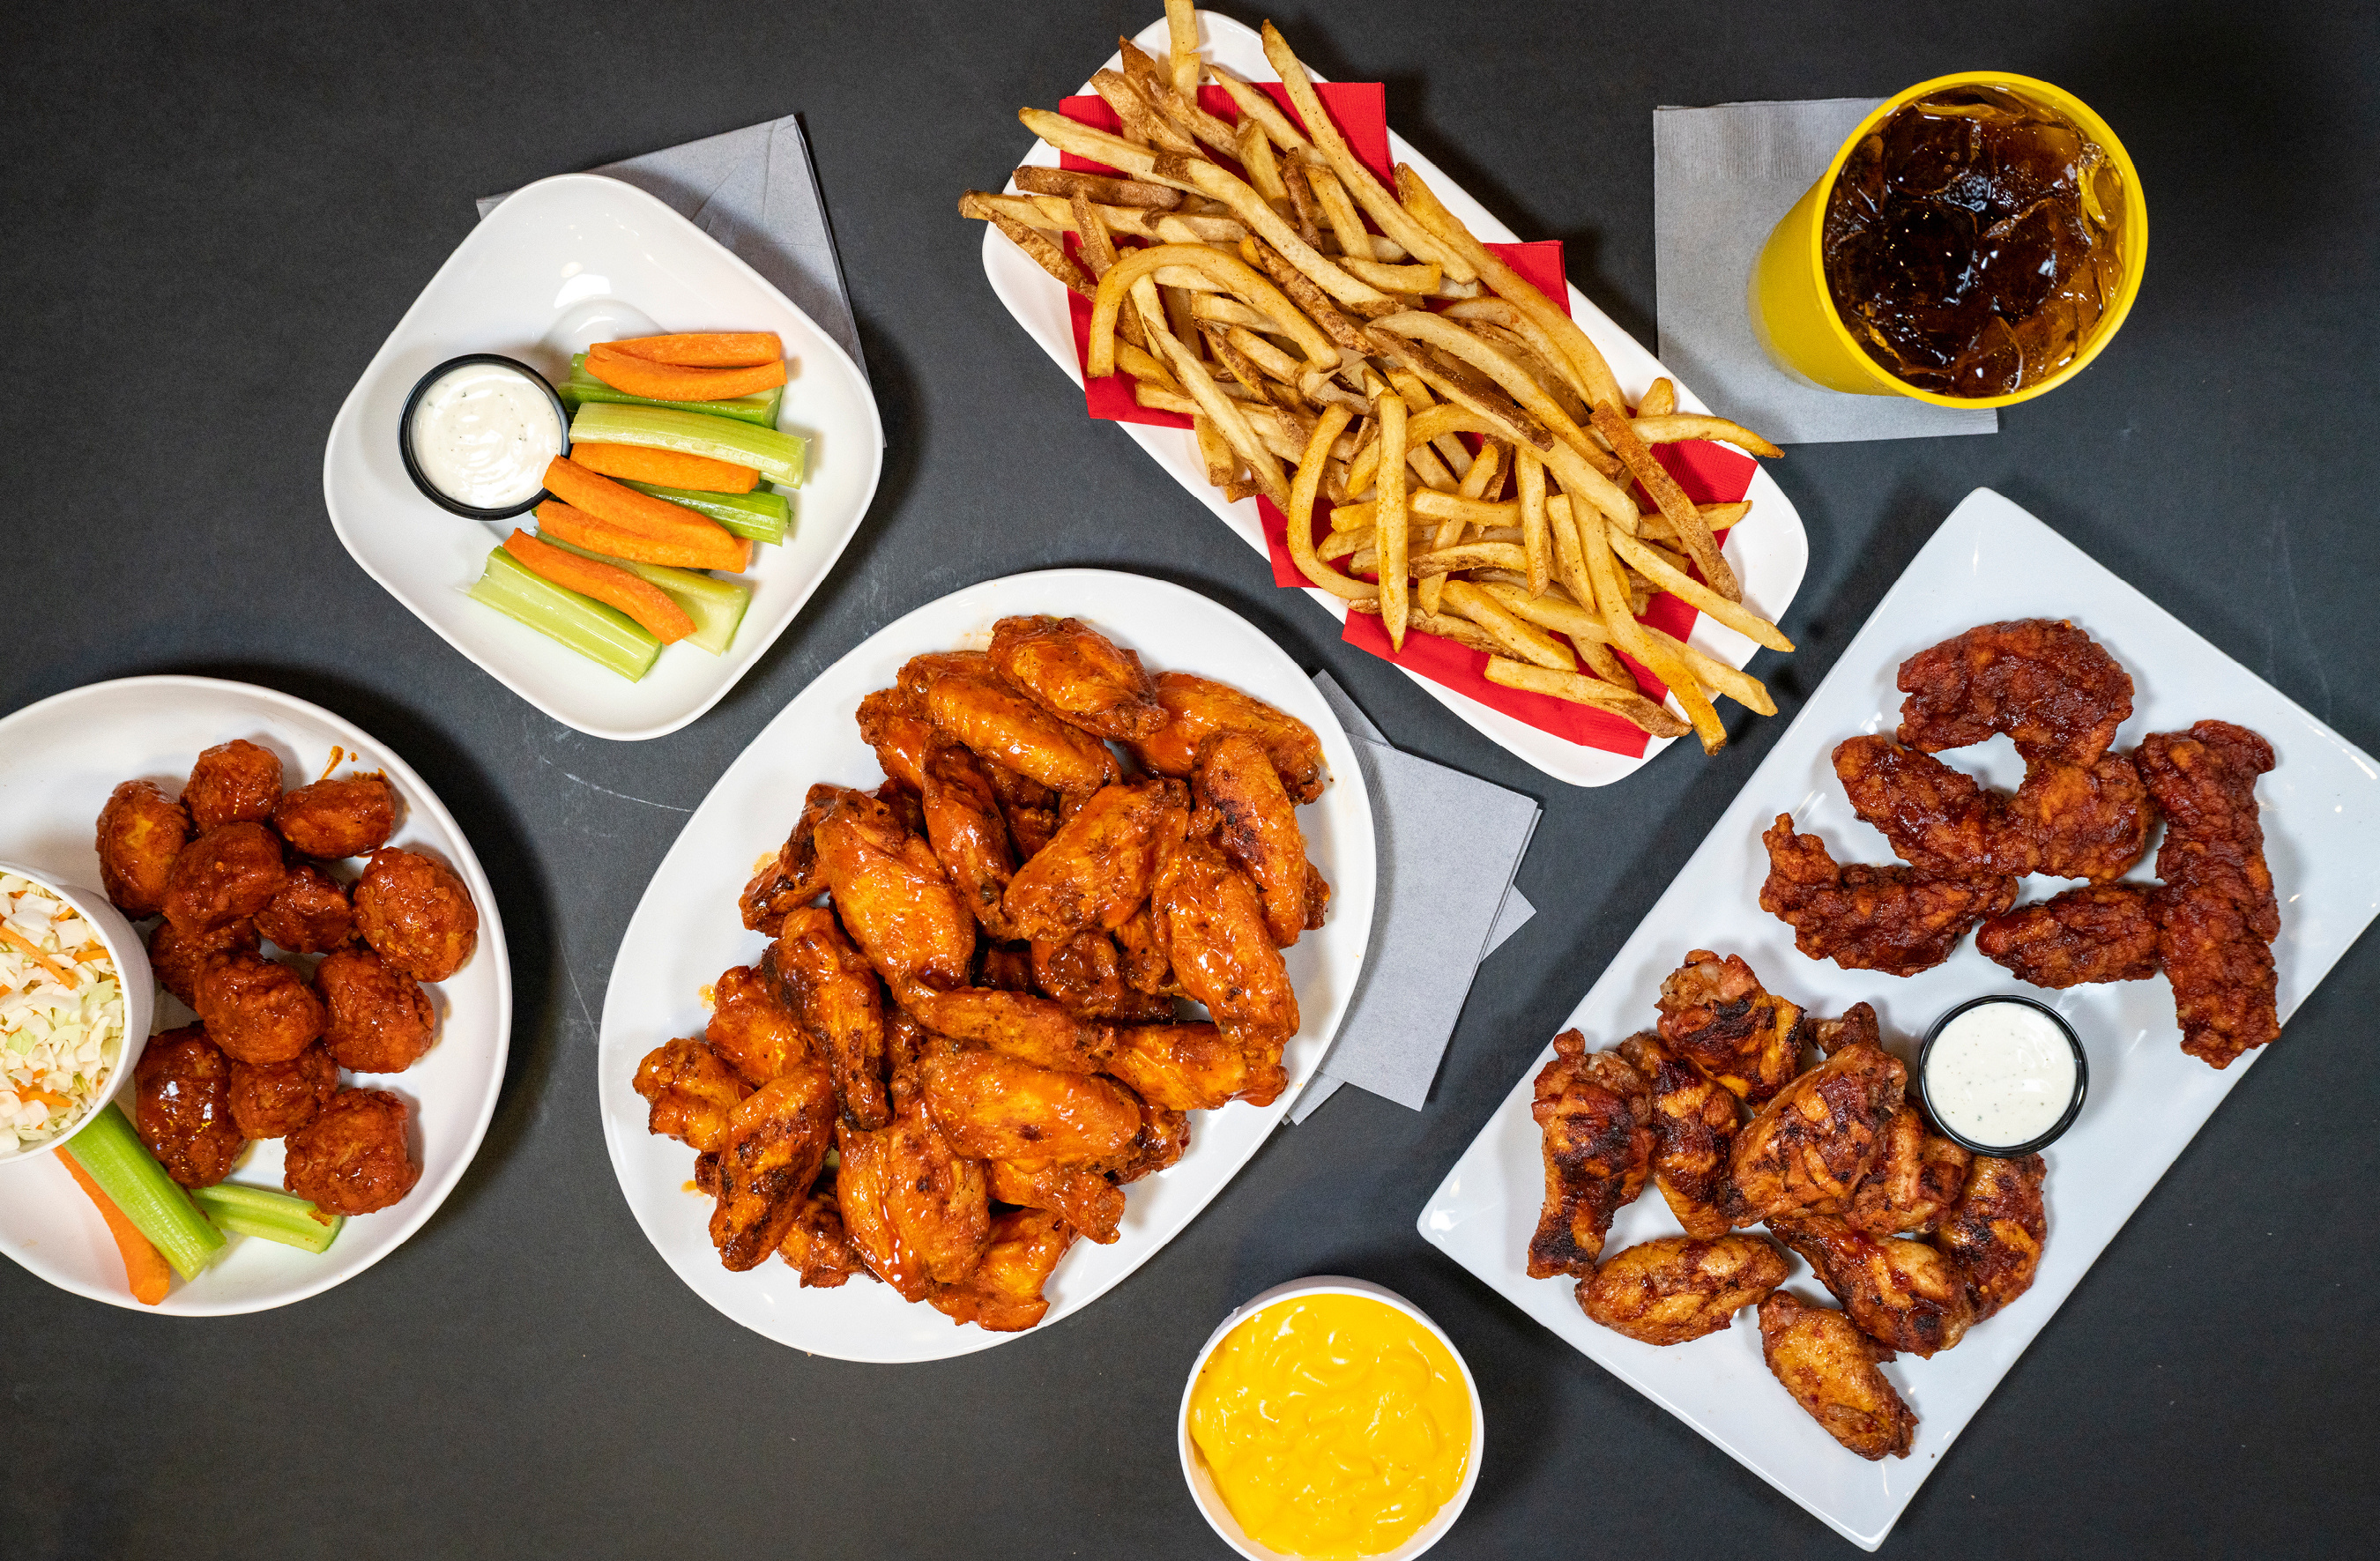 Wing Boss Offering 25% Off on National Wing Day